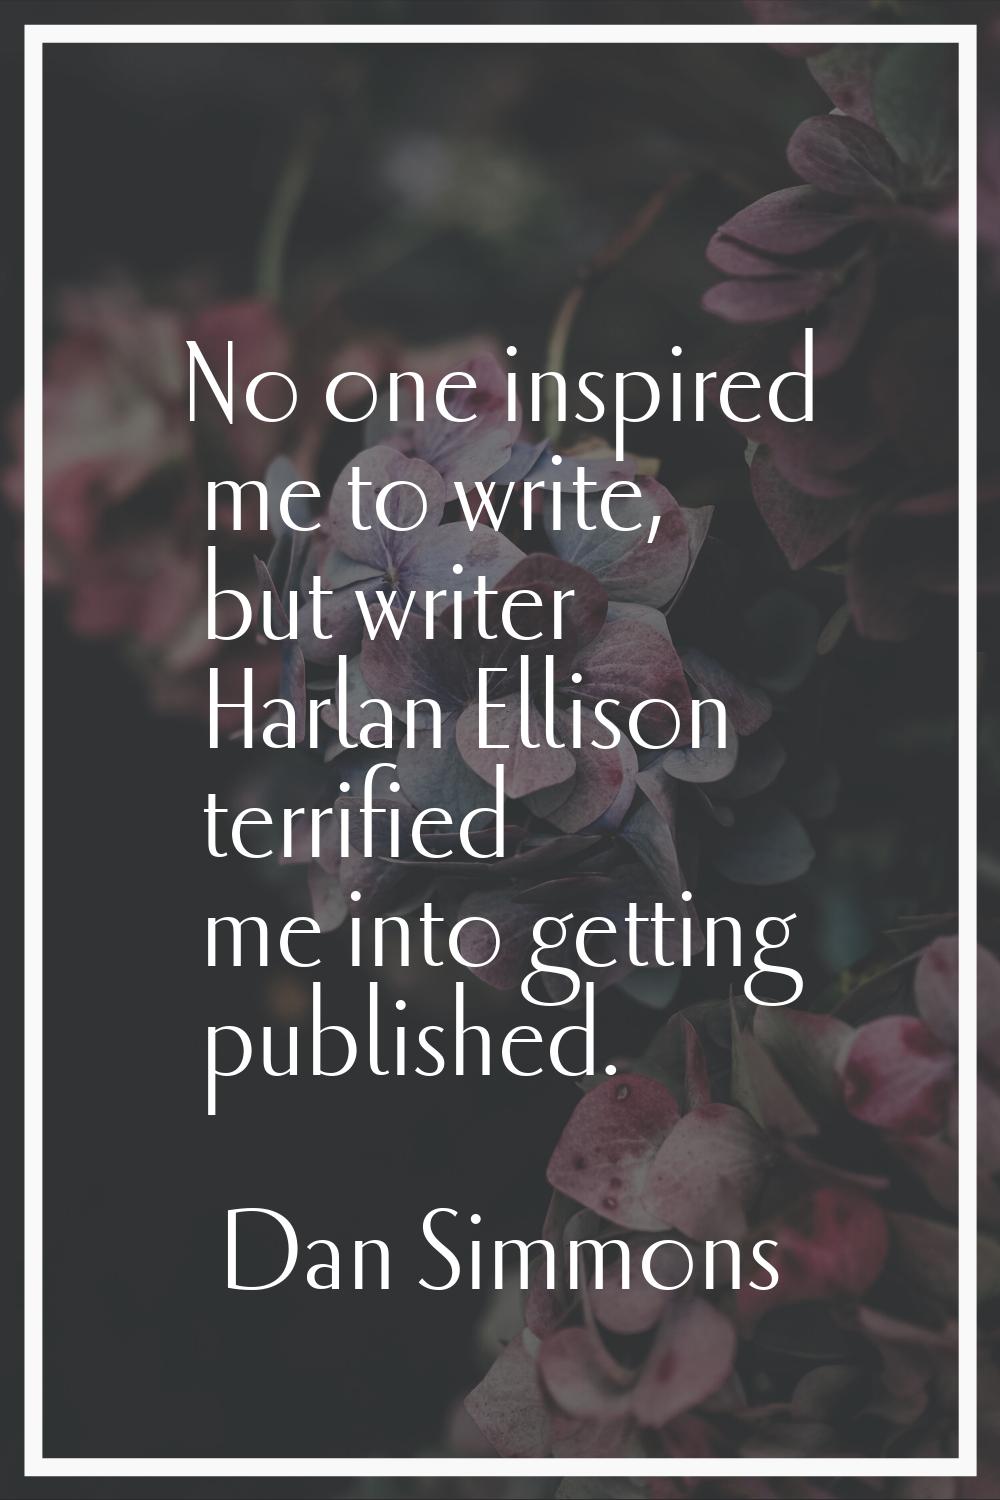 No one inspired me to write, but writer Harlan Ellison terrified me into getting published.